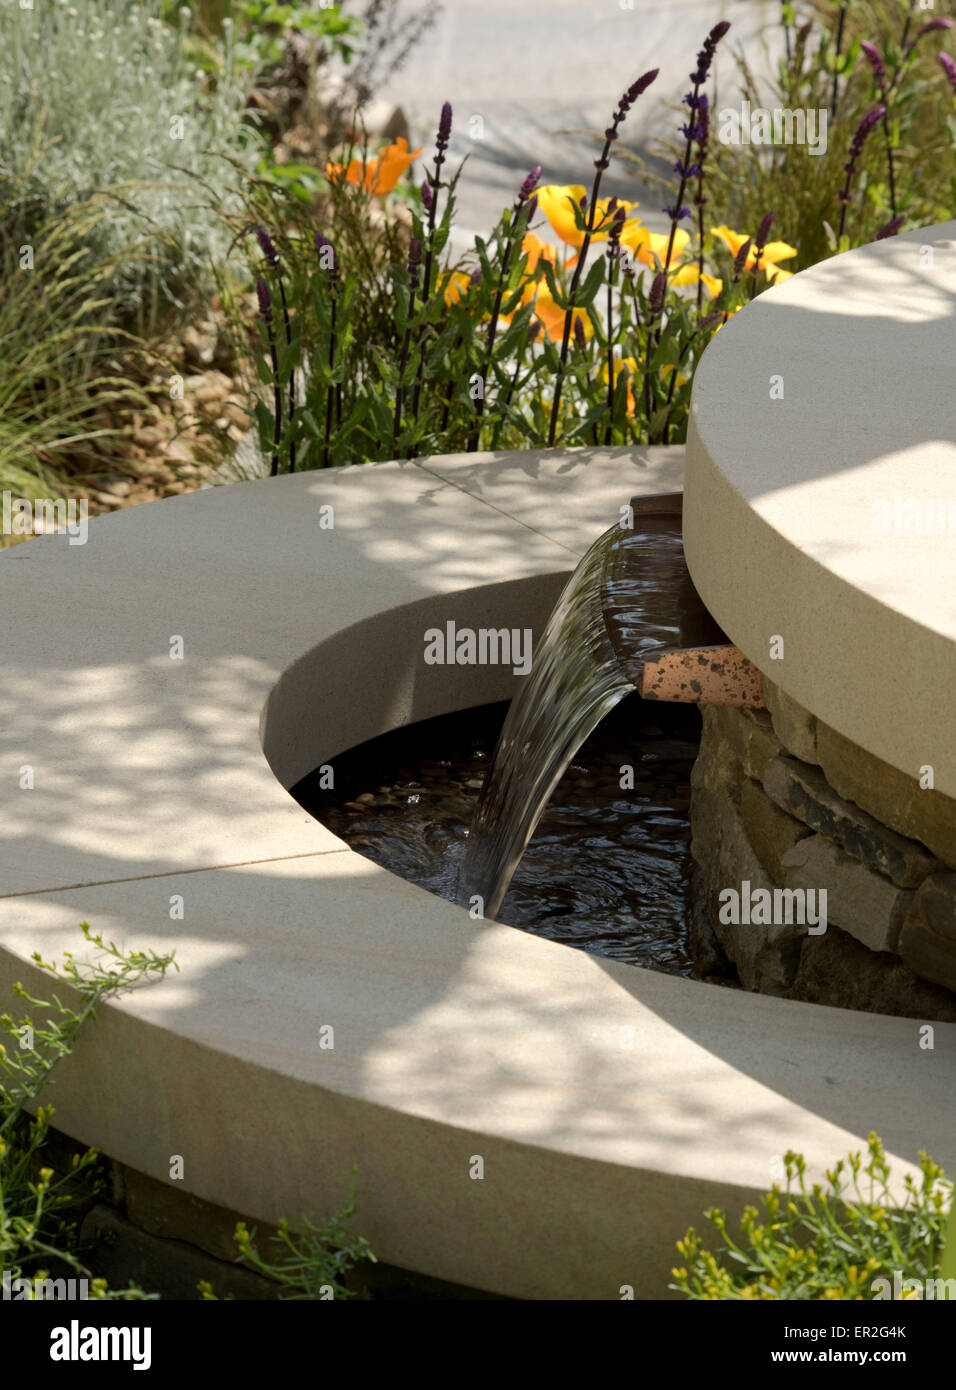 A close-up of a tiered stone fountain in The Royal Bank of Canada Garden designed by Mathew Wilson at The Chelsea Flower Show Stock Photo